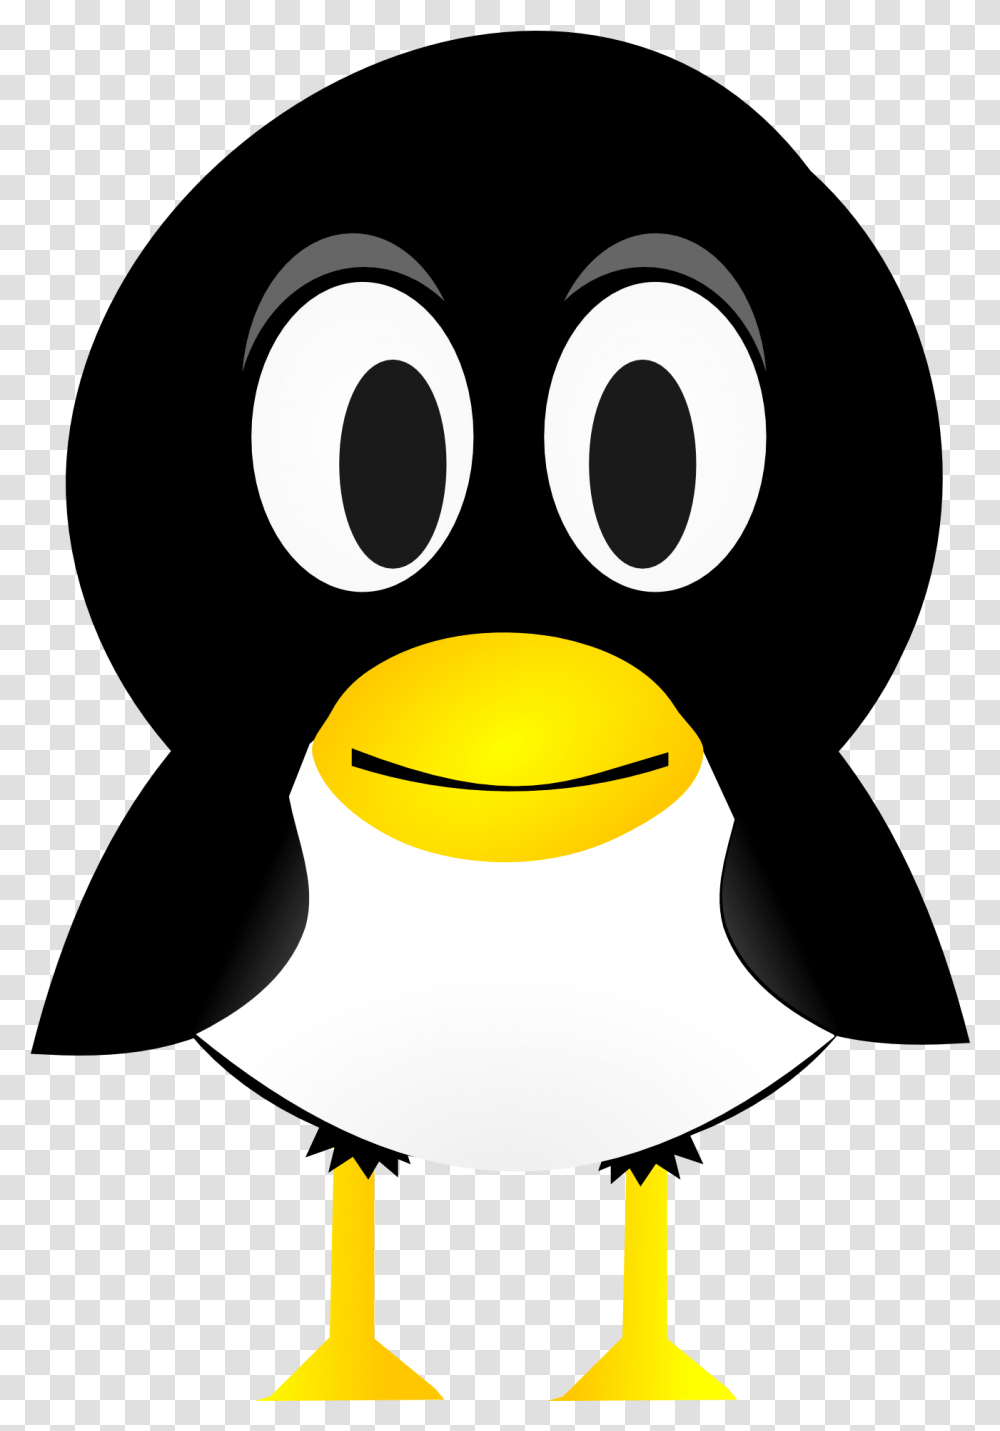 Cute Penguin Bird Linux Icon Free Image Linux Tux Cute, Lamp, Animal, Angry Birds Transparent Png